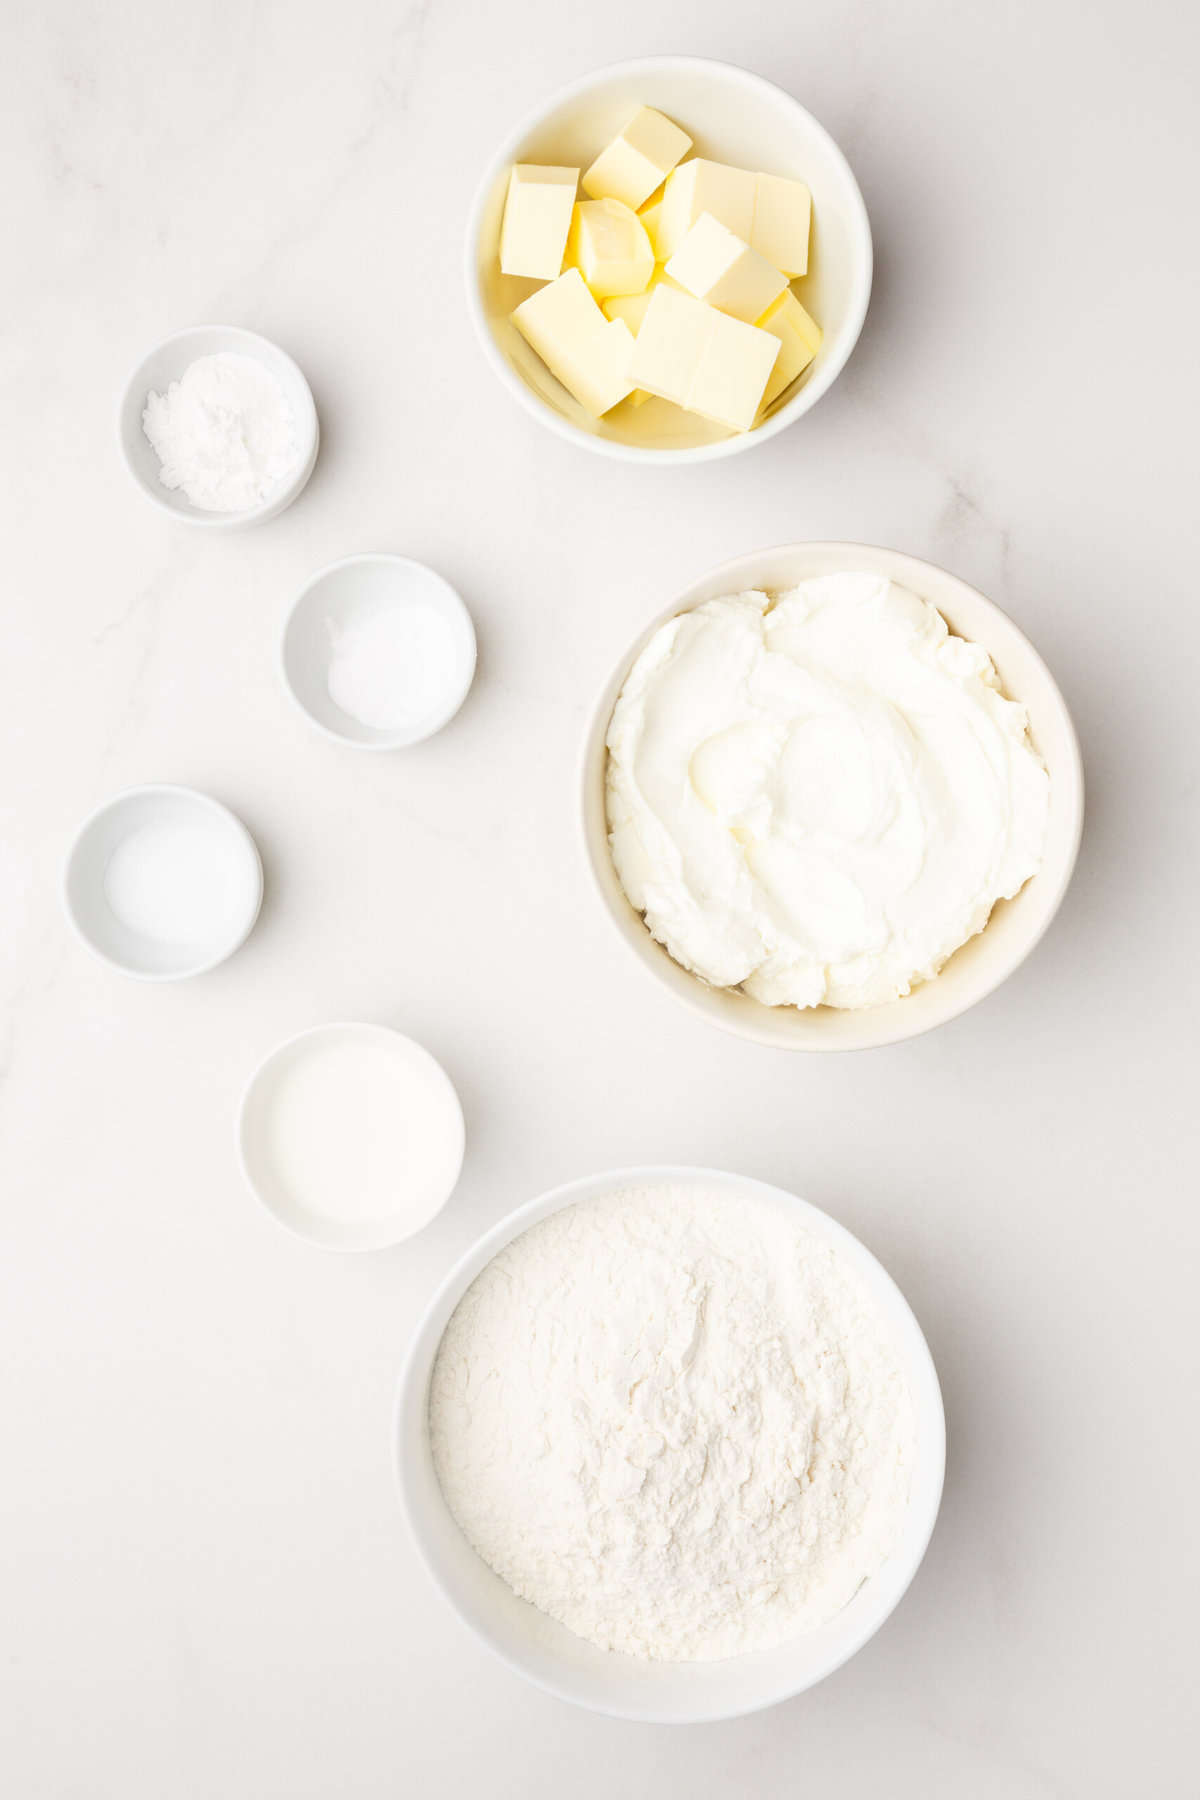 ingredients to make sour cream biscuits. 